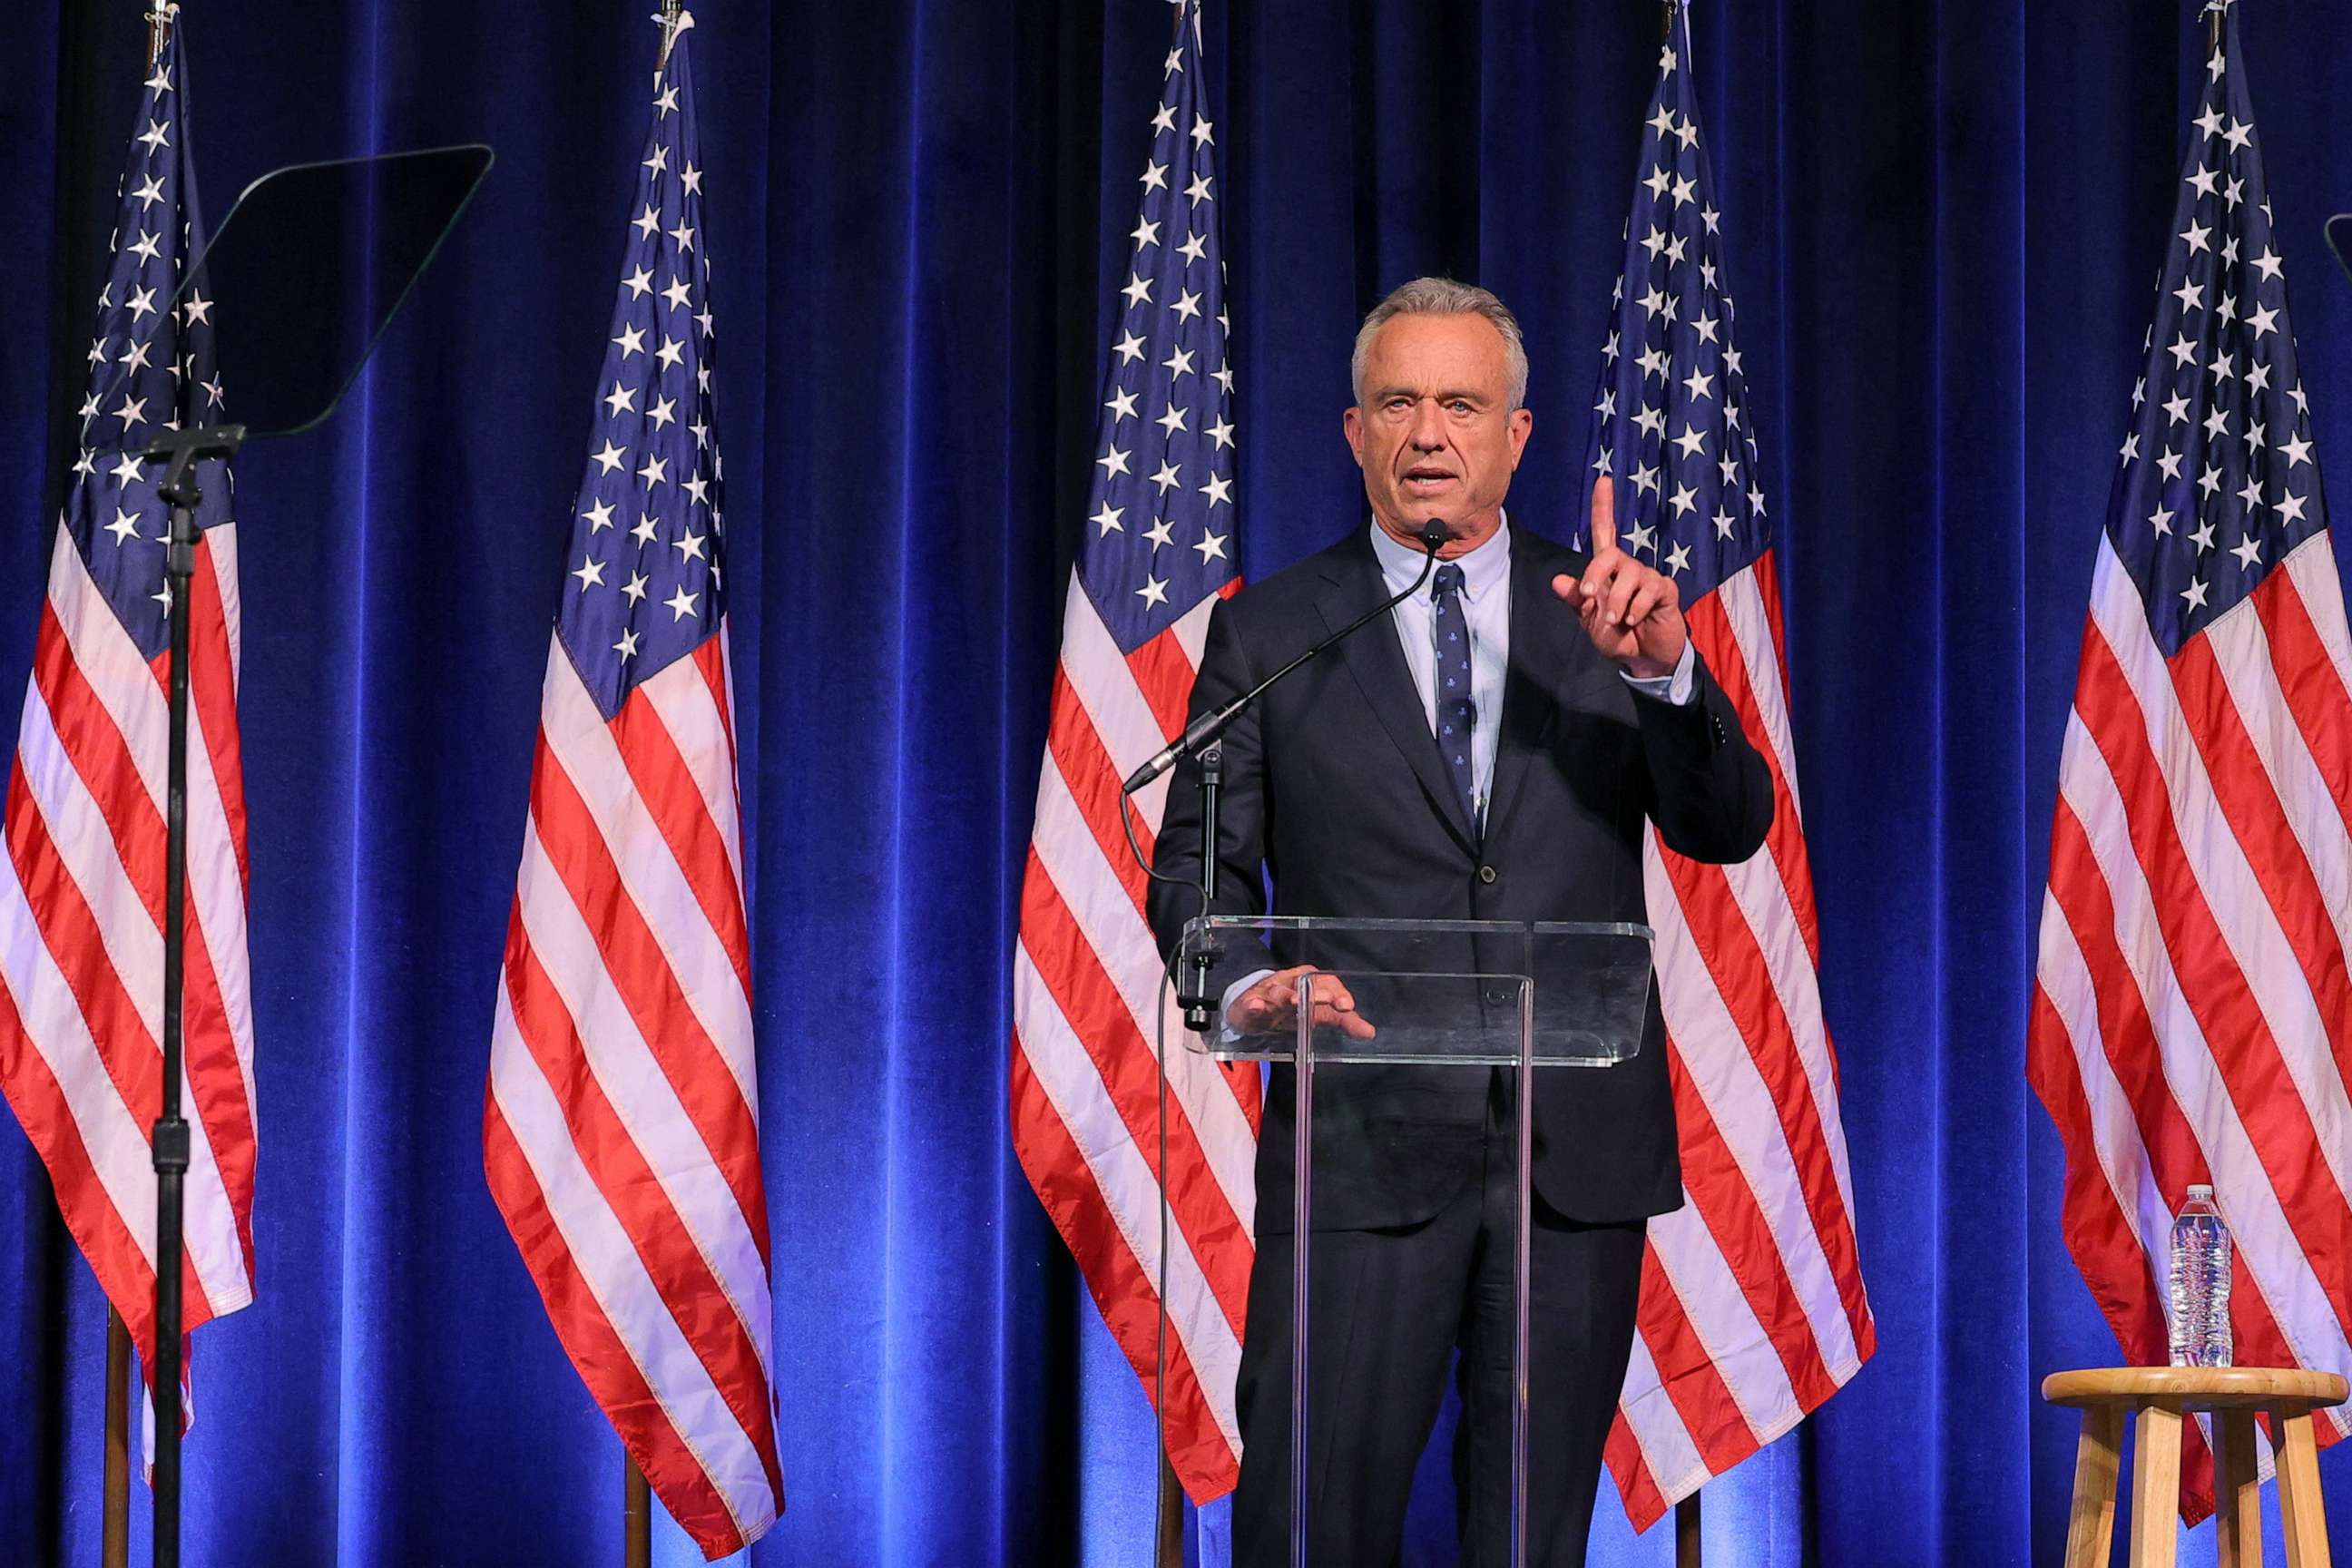 Robert Kennedy Jr.'s presidential campaign attracts GOPfriendly donors